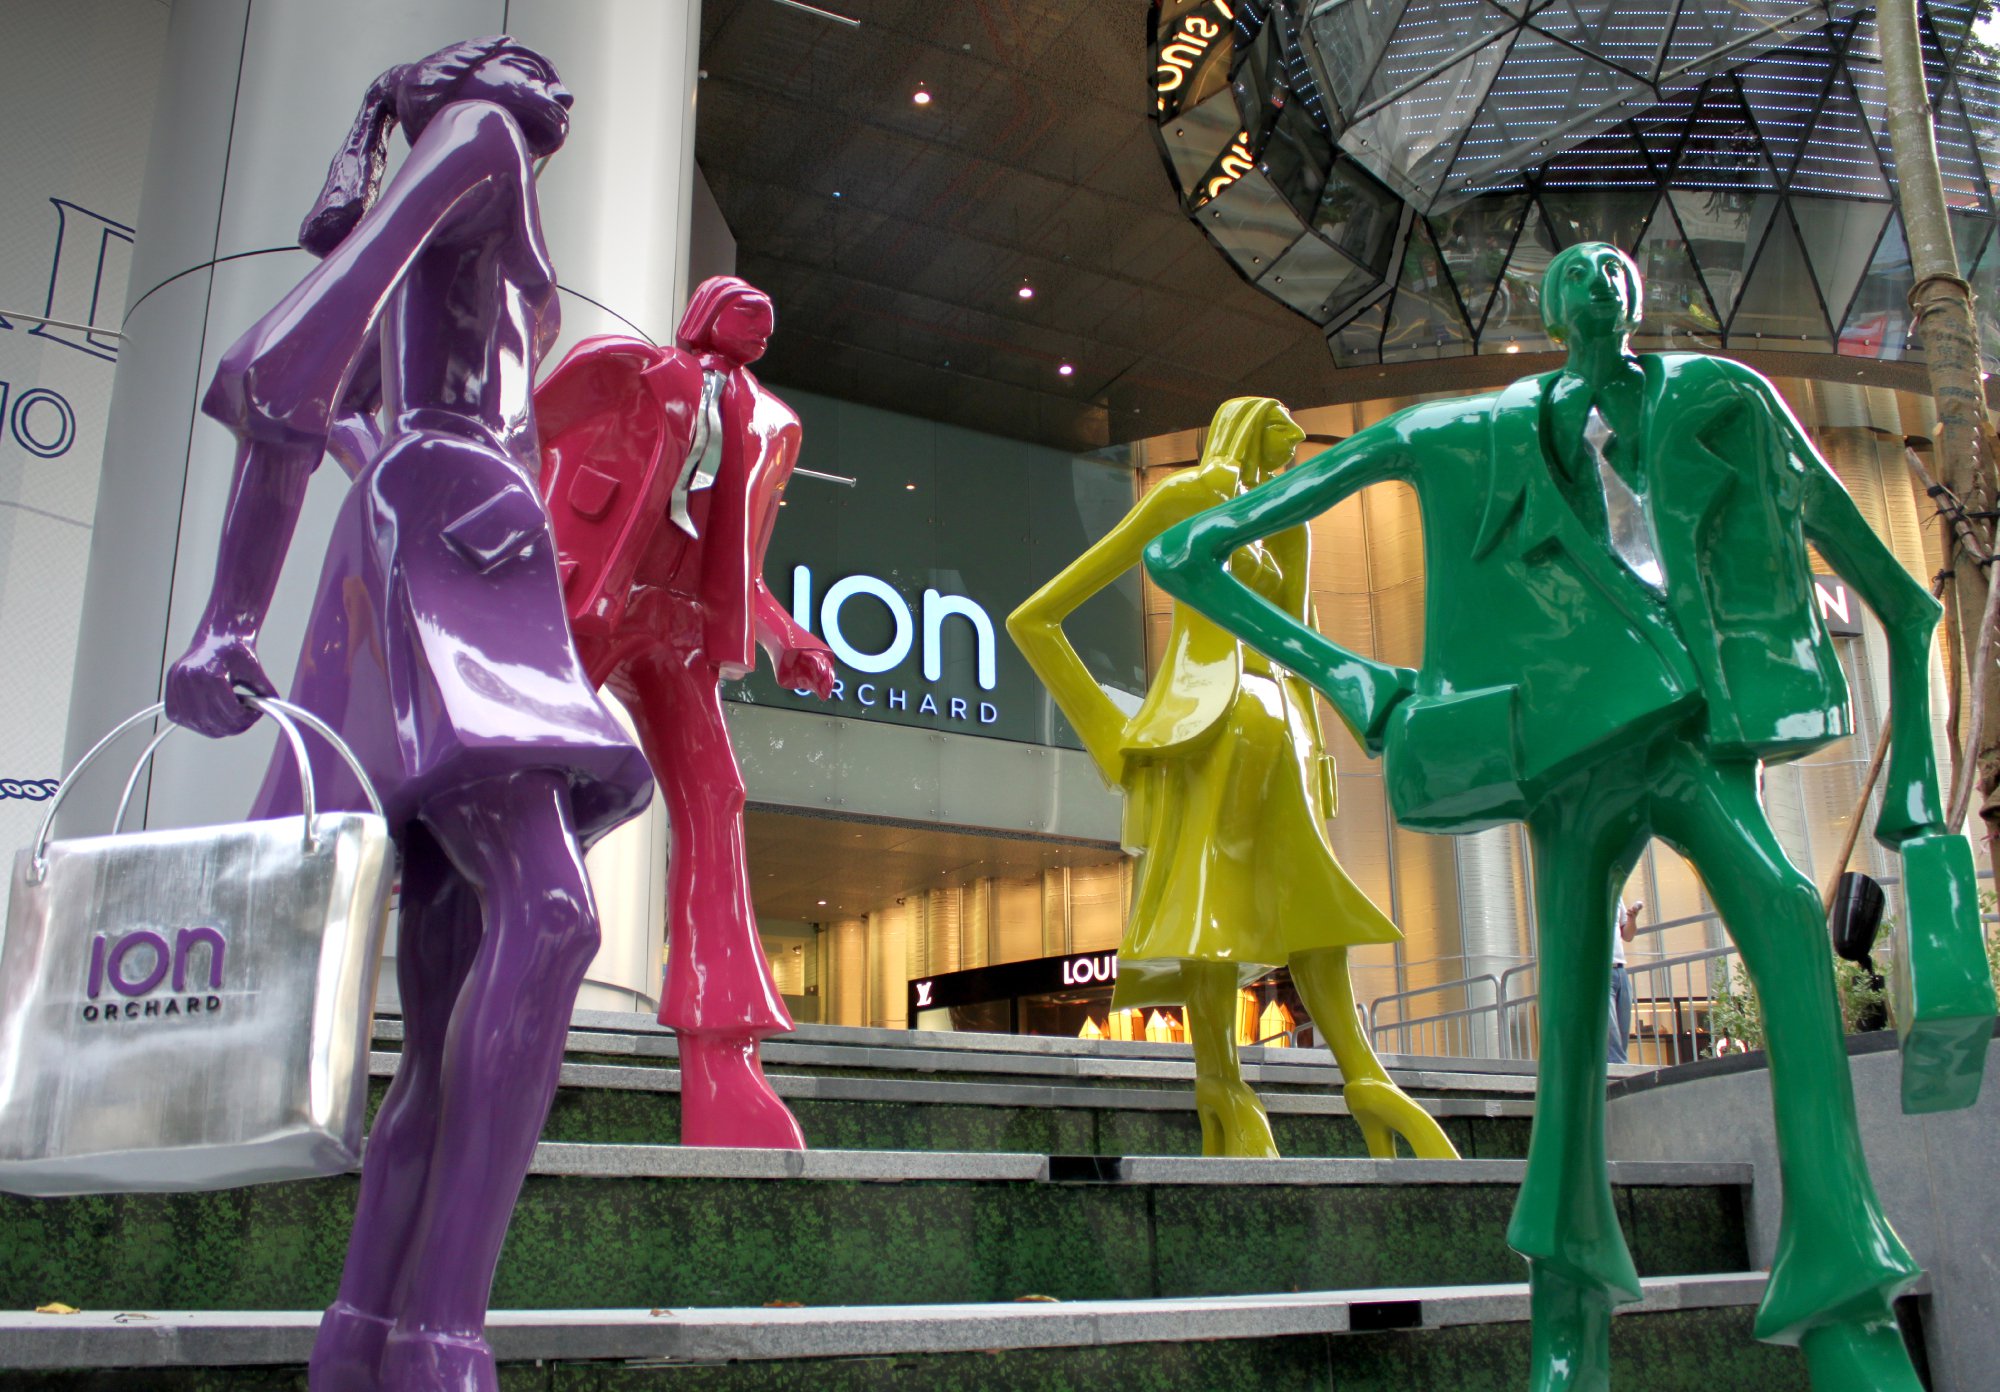 Image of ION Orchard